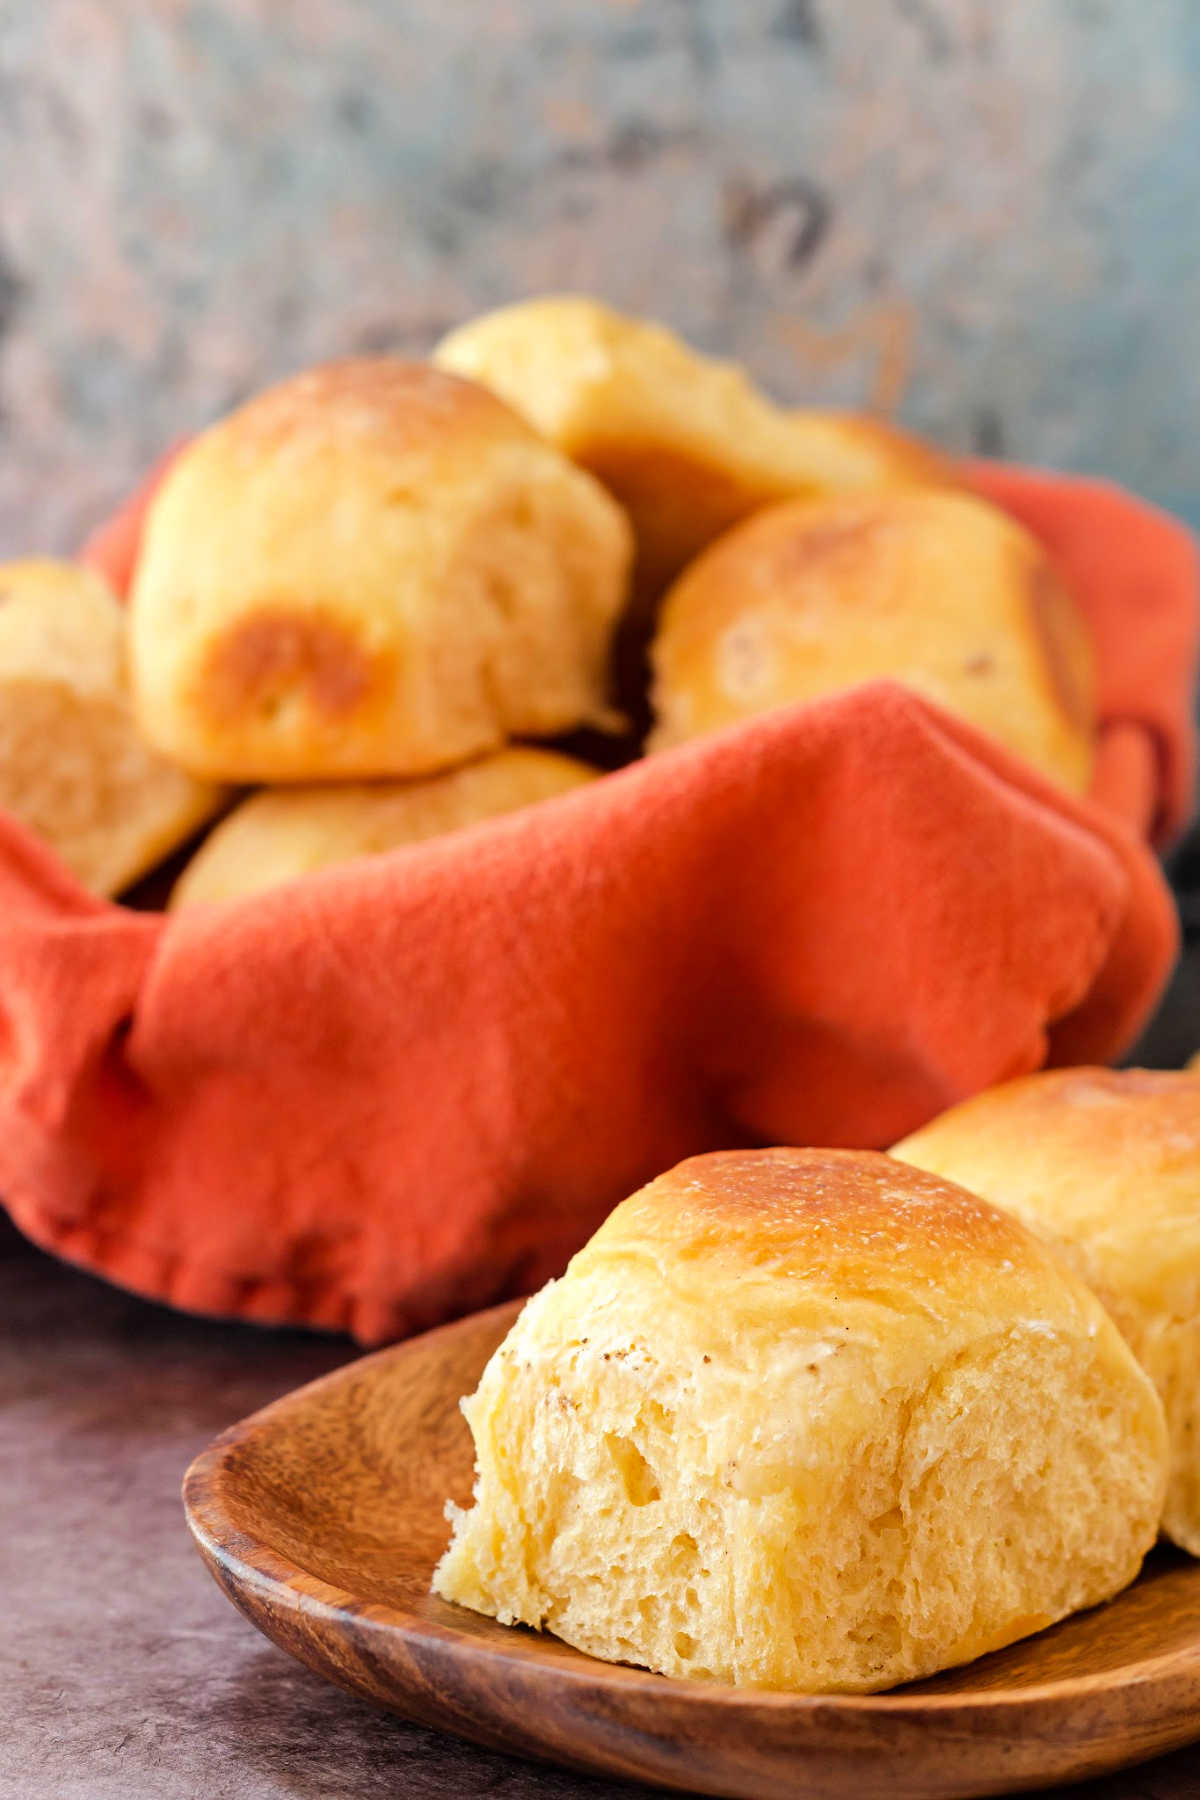 basket of rolls with an orange napkin and a cheese roll on a wooden plate